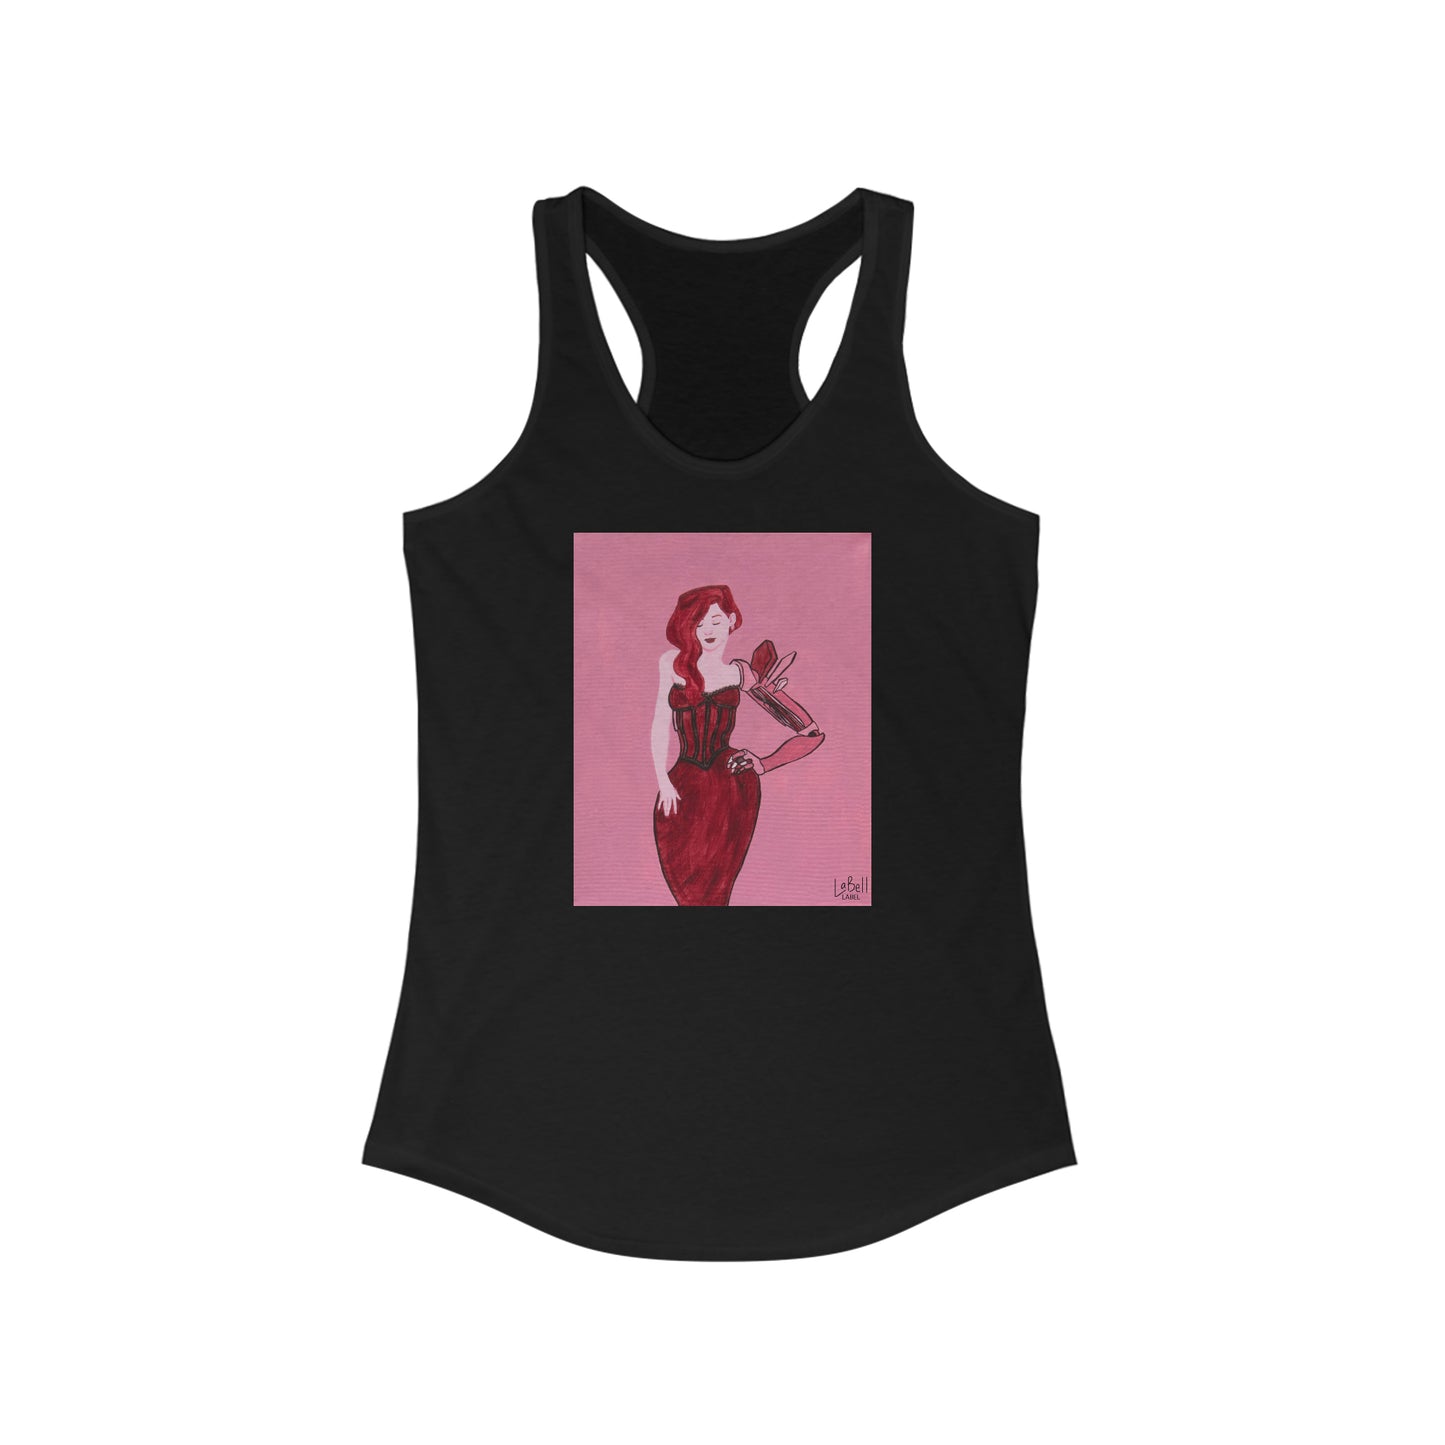 "The MODels" - Alizarin Crimson Female - with Solid Background - Women's Ideal Racerback Tank